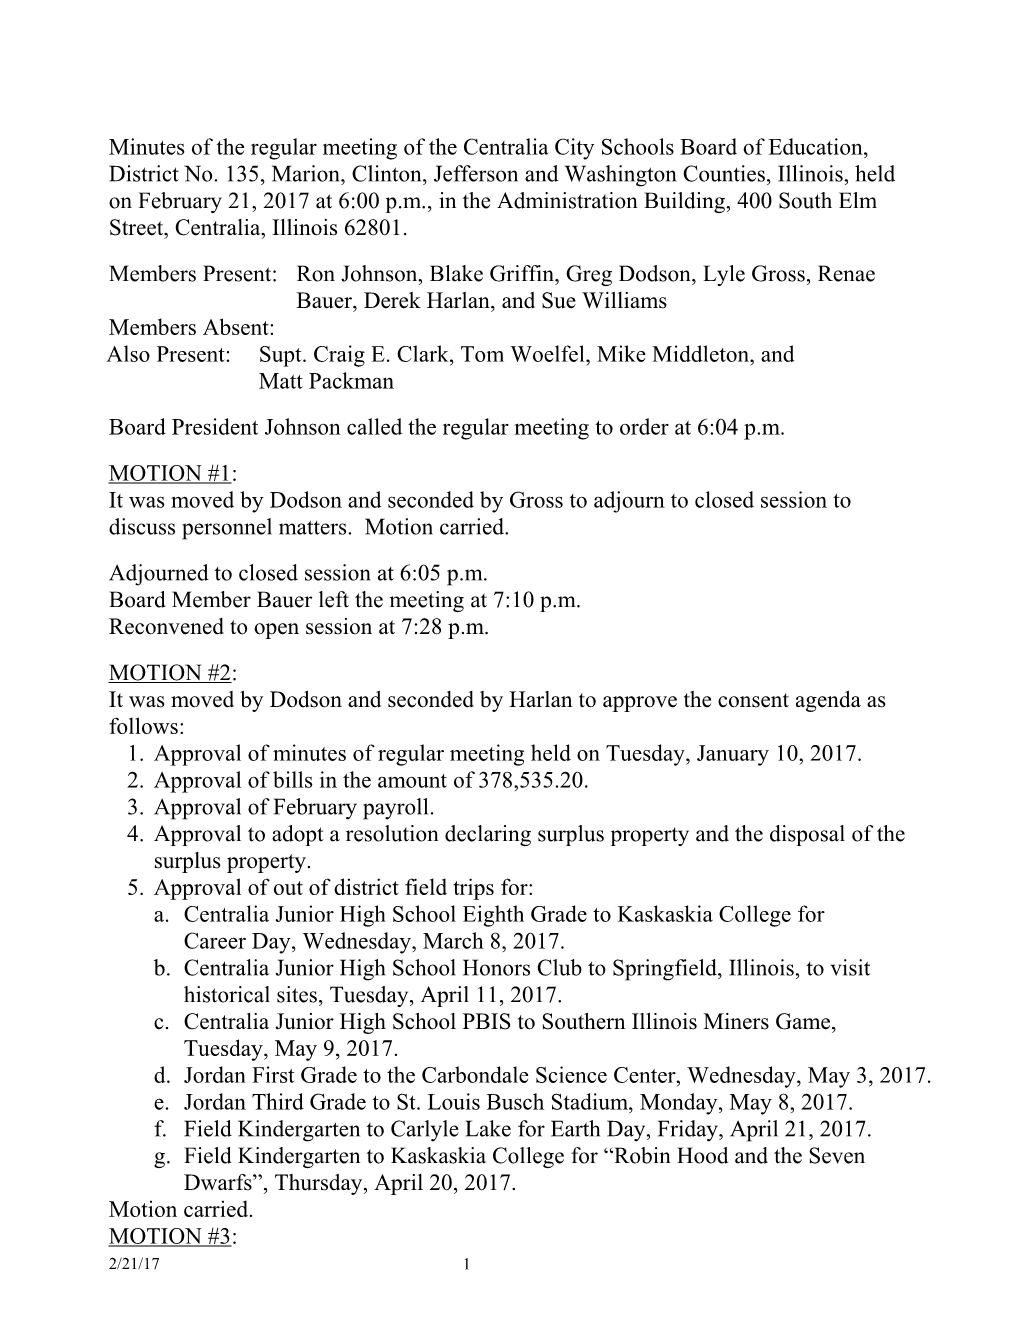 Minutes of the Regular Meeting of the Centralia City Schools Board of Education, District No